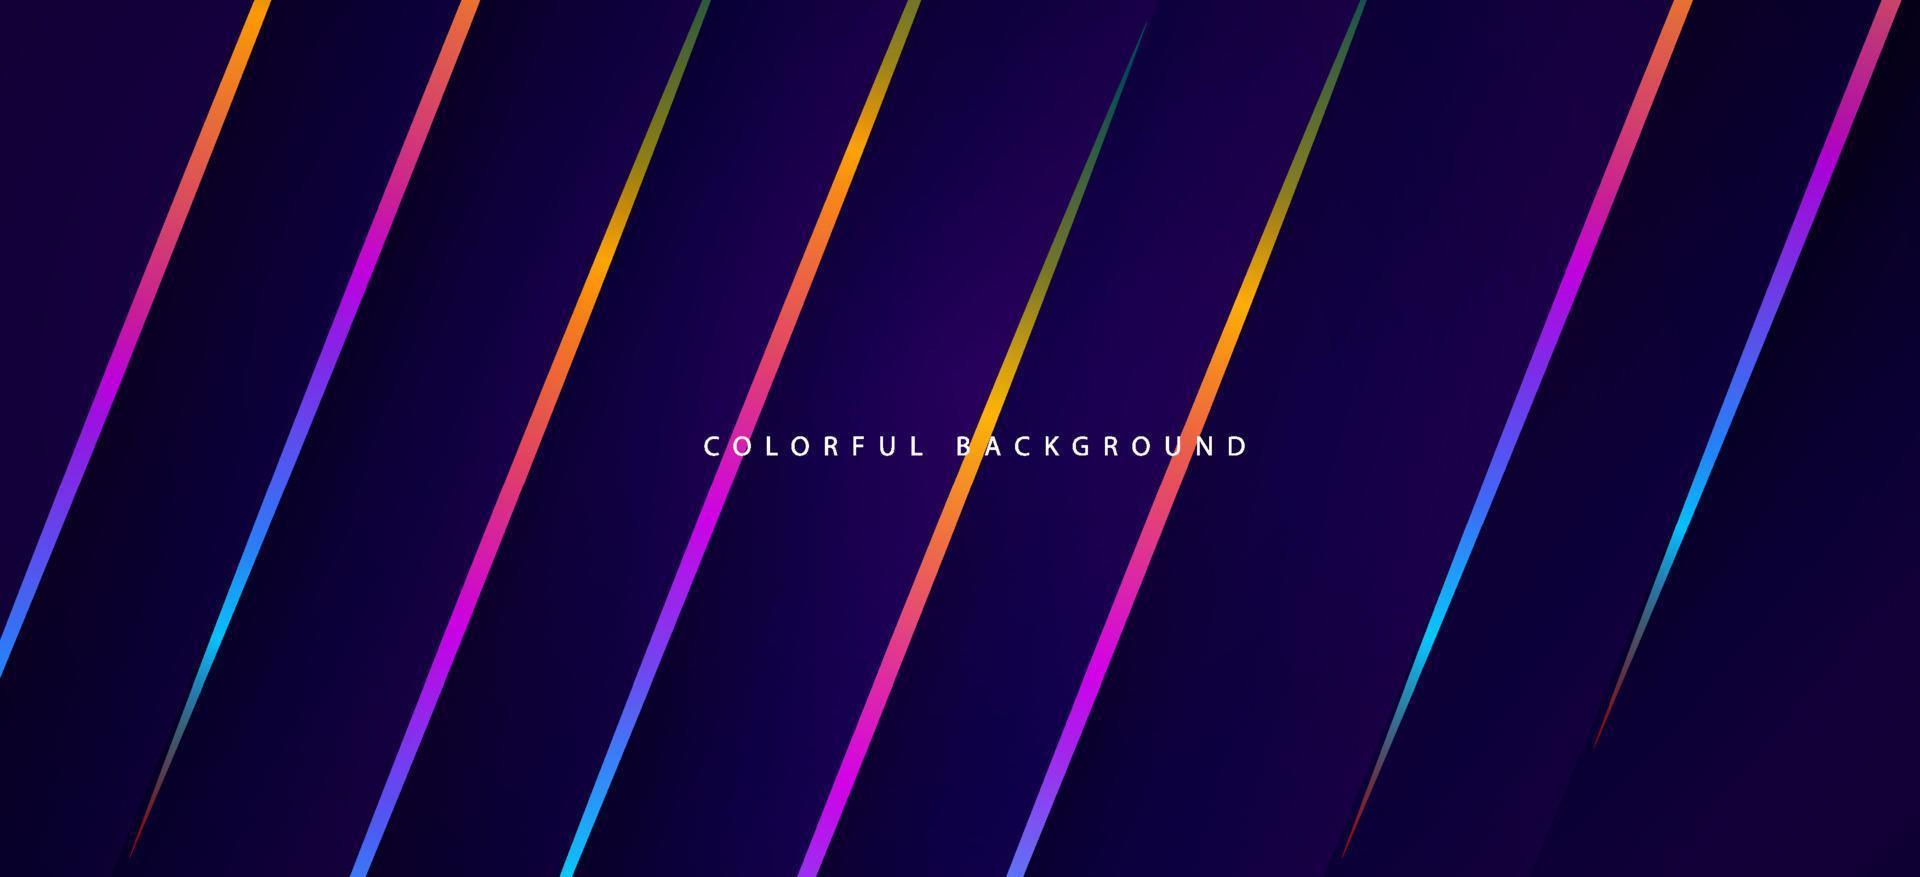 Abstract geometric with lines colorful background vector